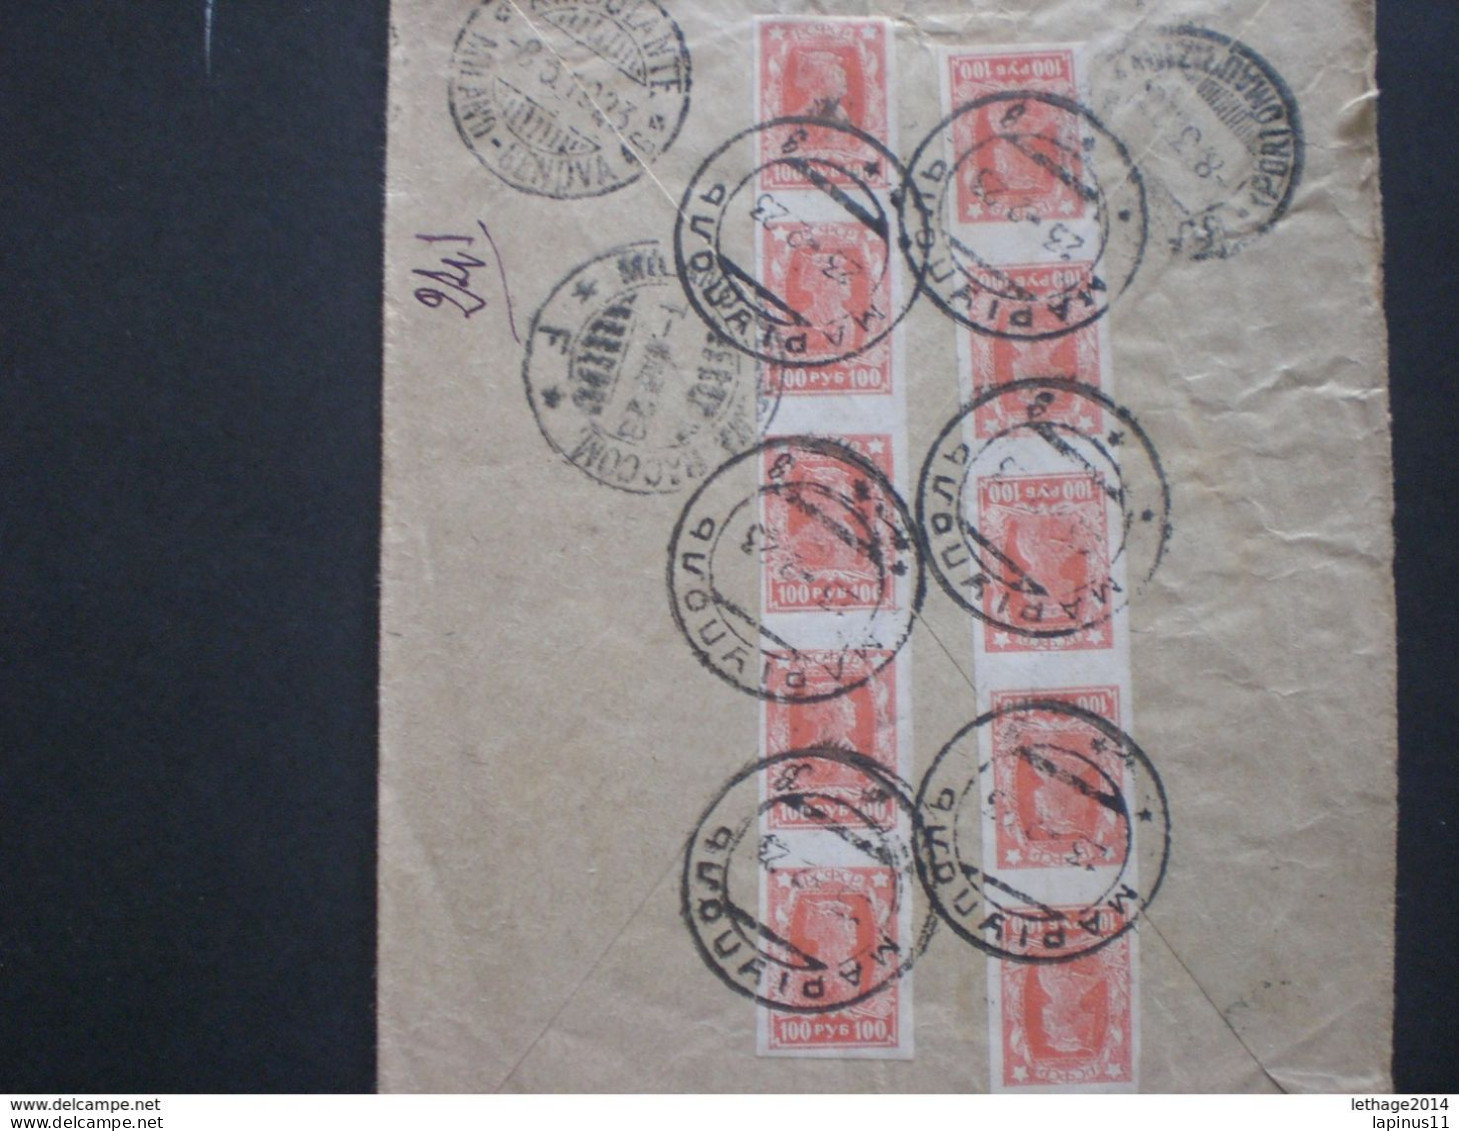 RUSSIA RUSSIE РОССИЯ STAMPS COVER 1923 REGISTER MAIL RUSSLAND TO ITALY OVER STAMPS RRR RIF. TAGG (178) - Covers & Documents